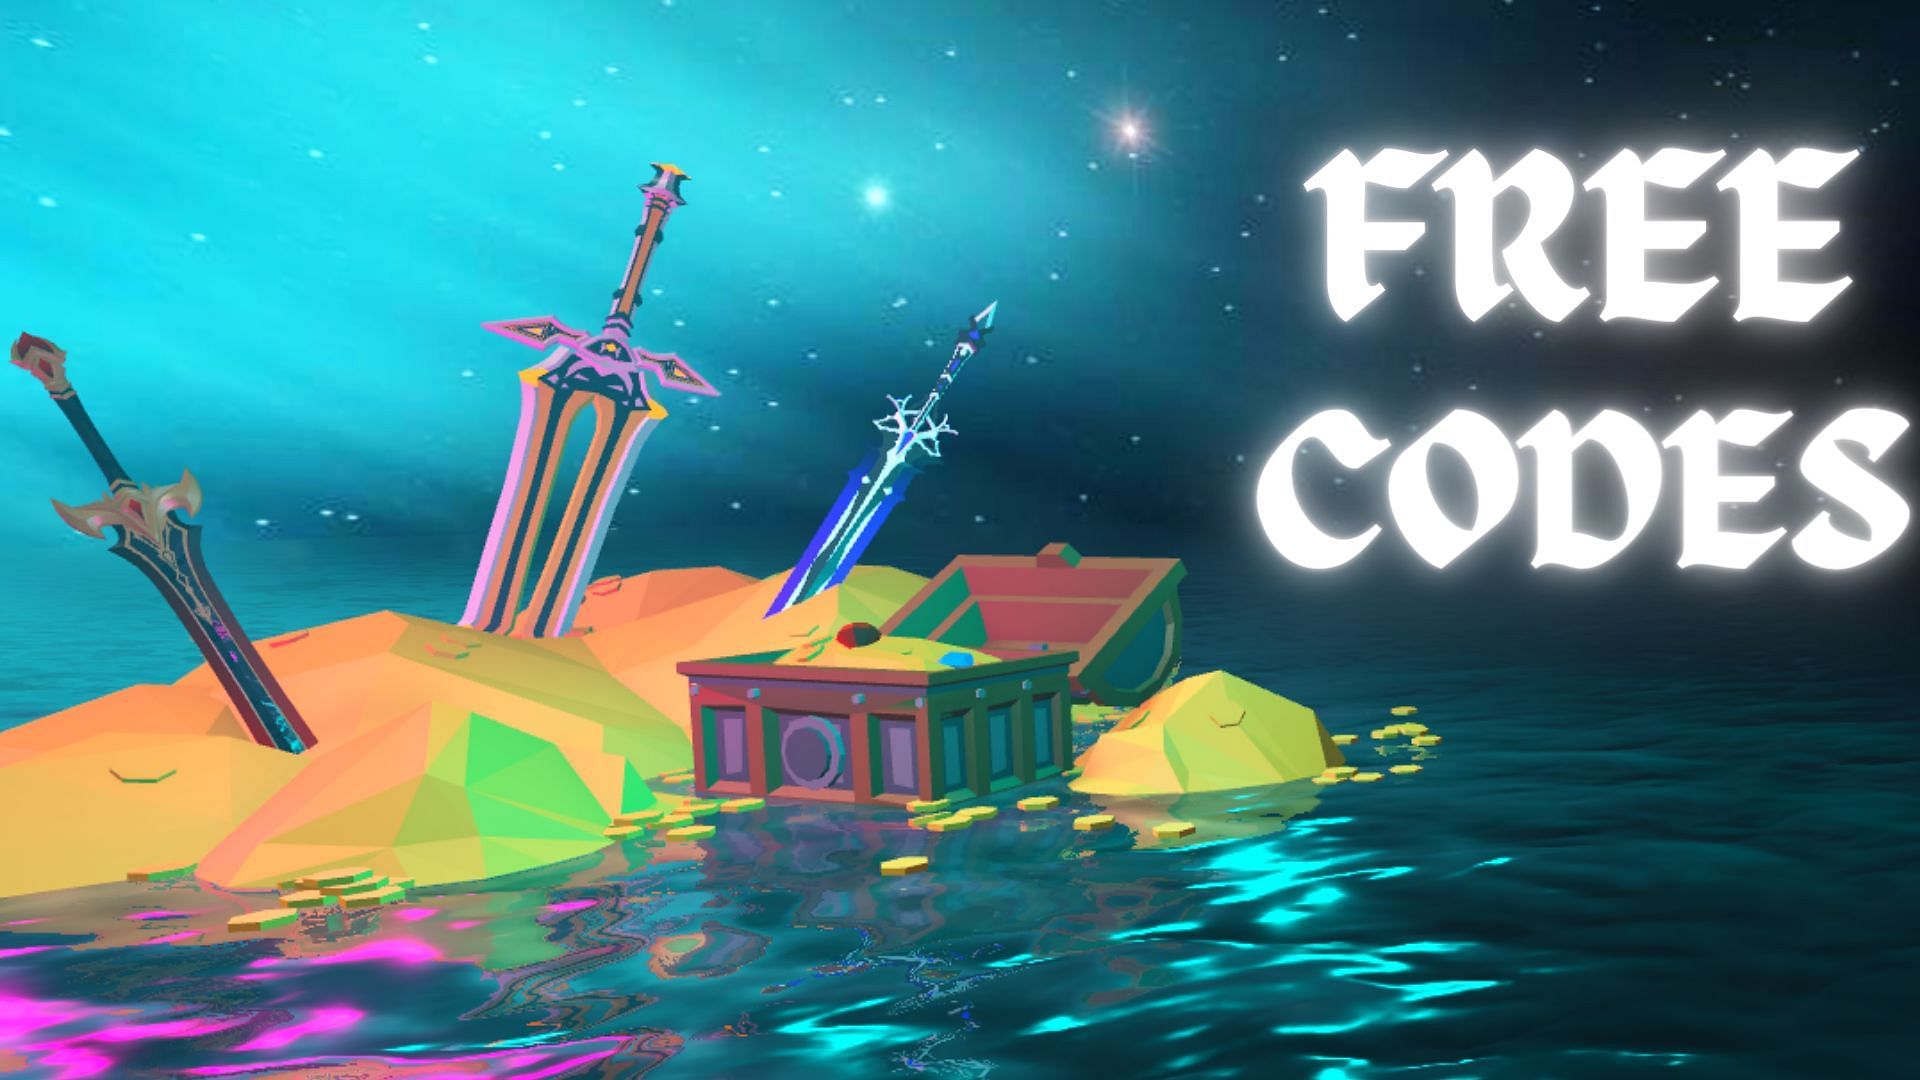 Free Active codes in Dream Six (Image via Roblox)